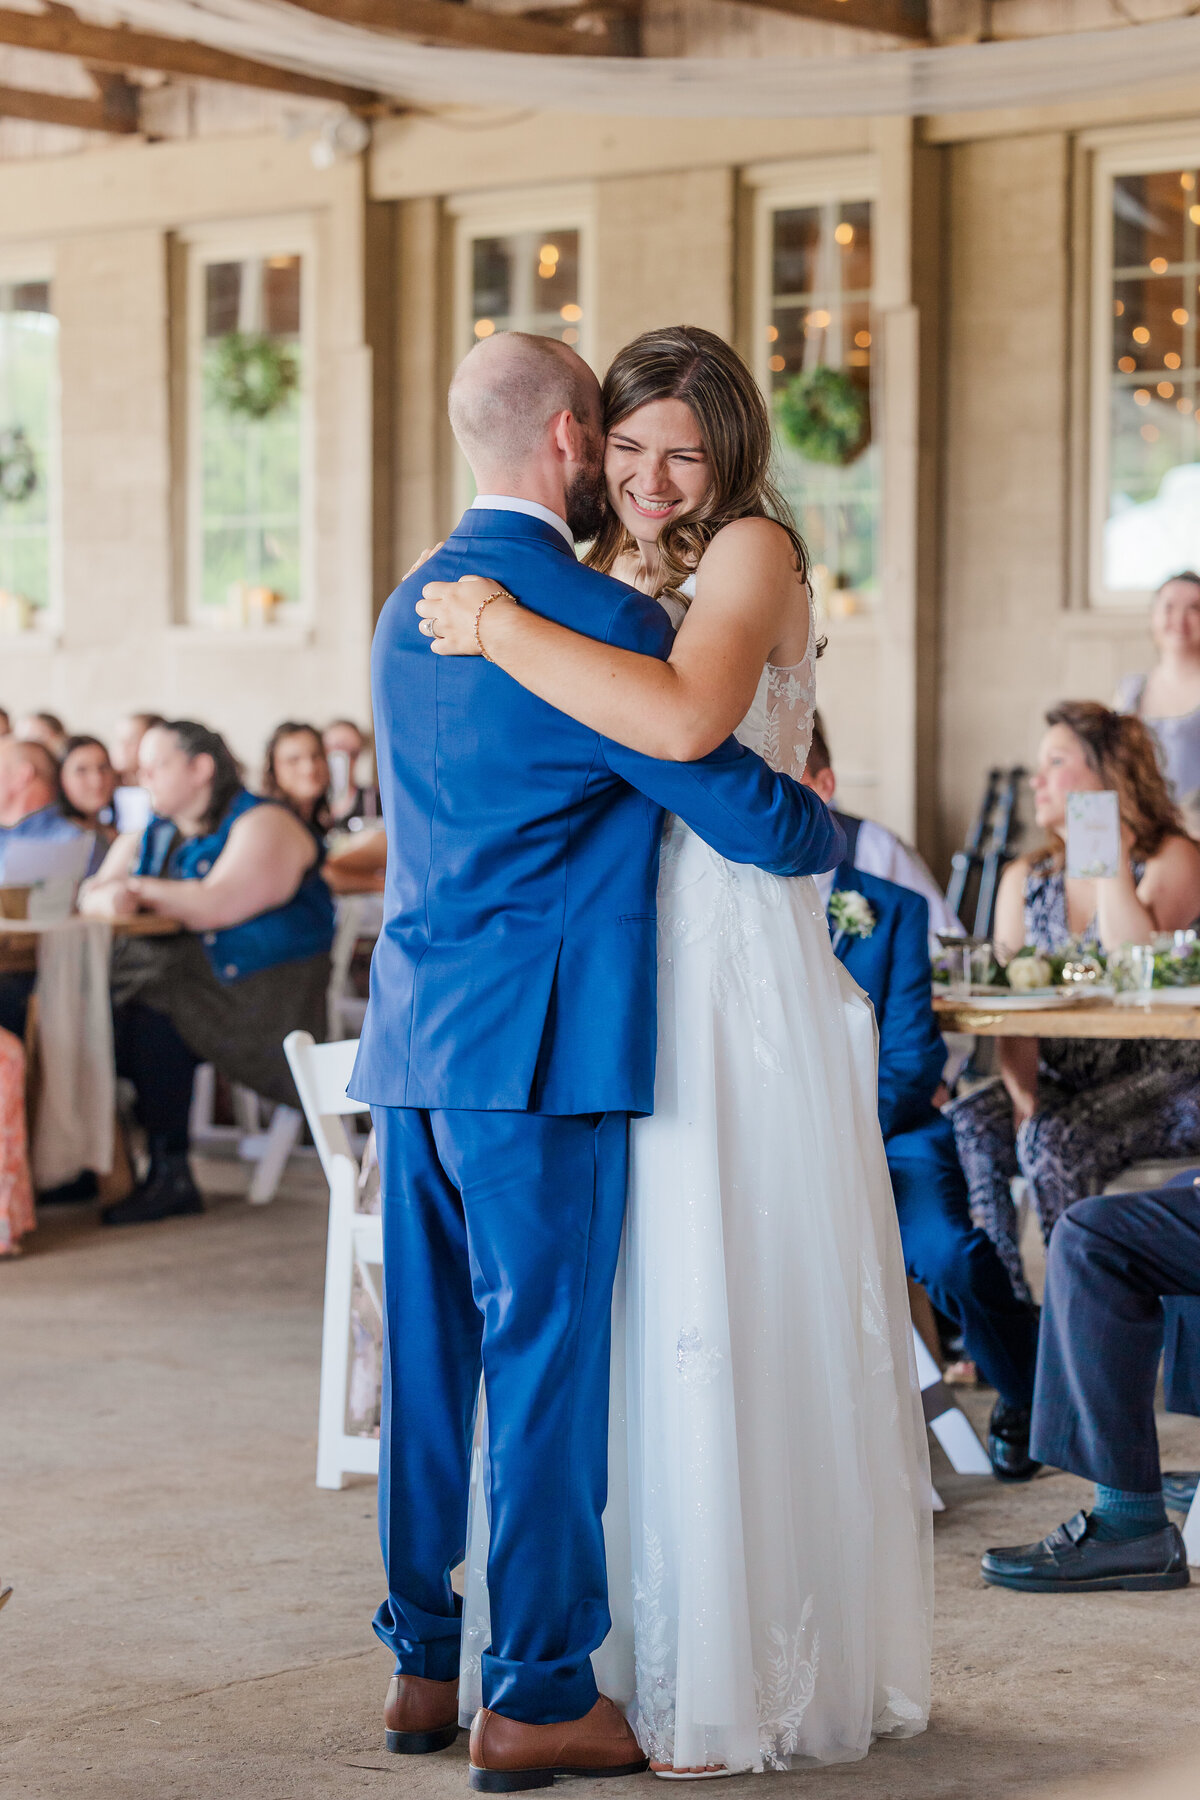 bride and groom sharing first dance wearing blue suit and white dress with family watching in background